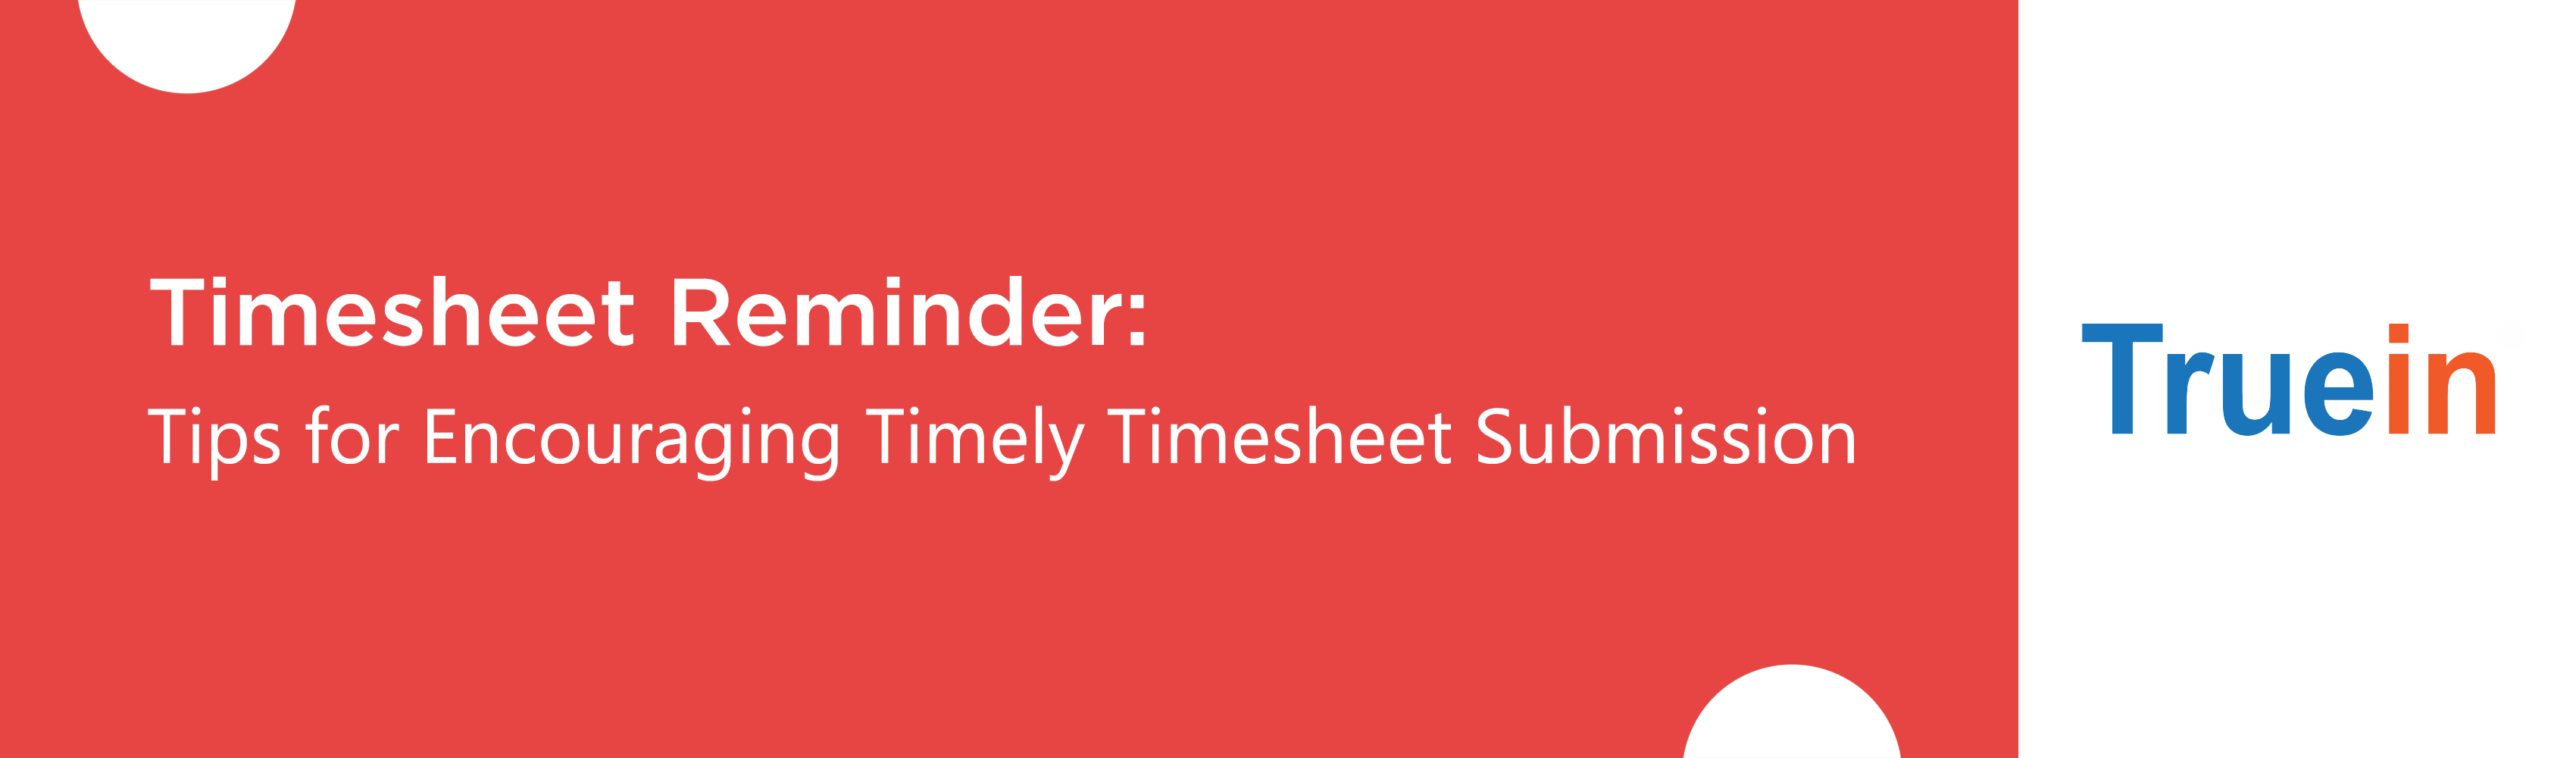 Timesheet Reminder: Tips for Encouraging Timely Timesheet Submission